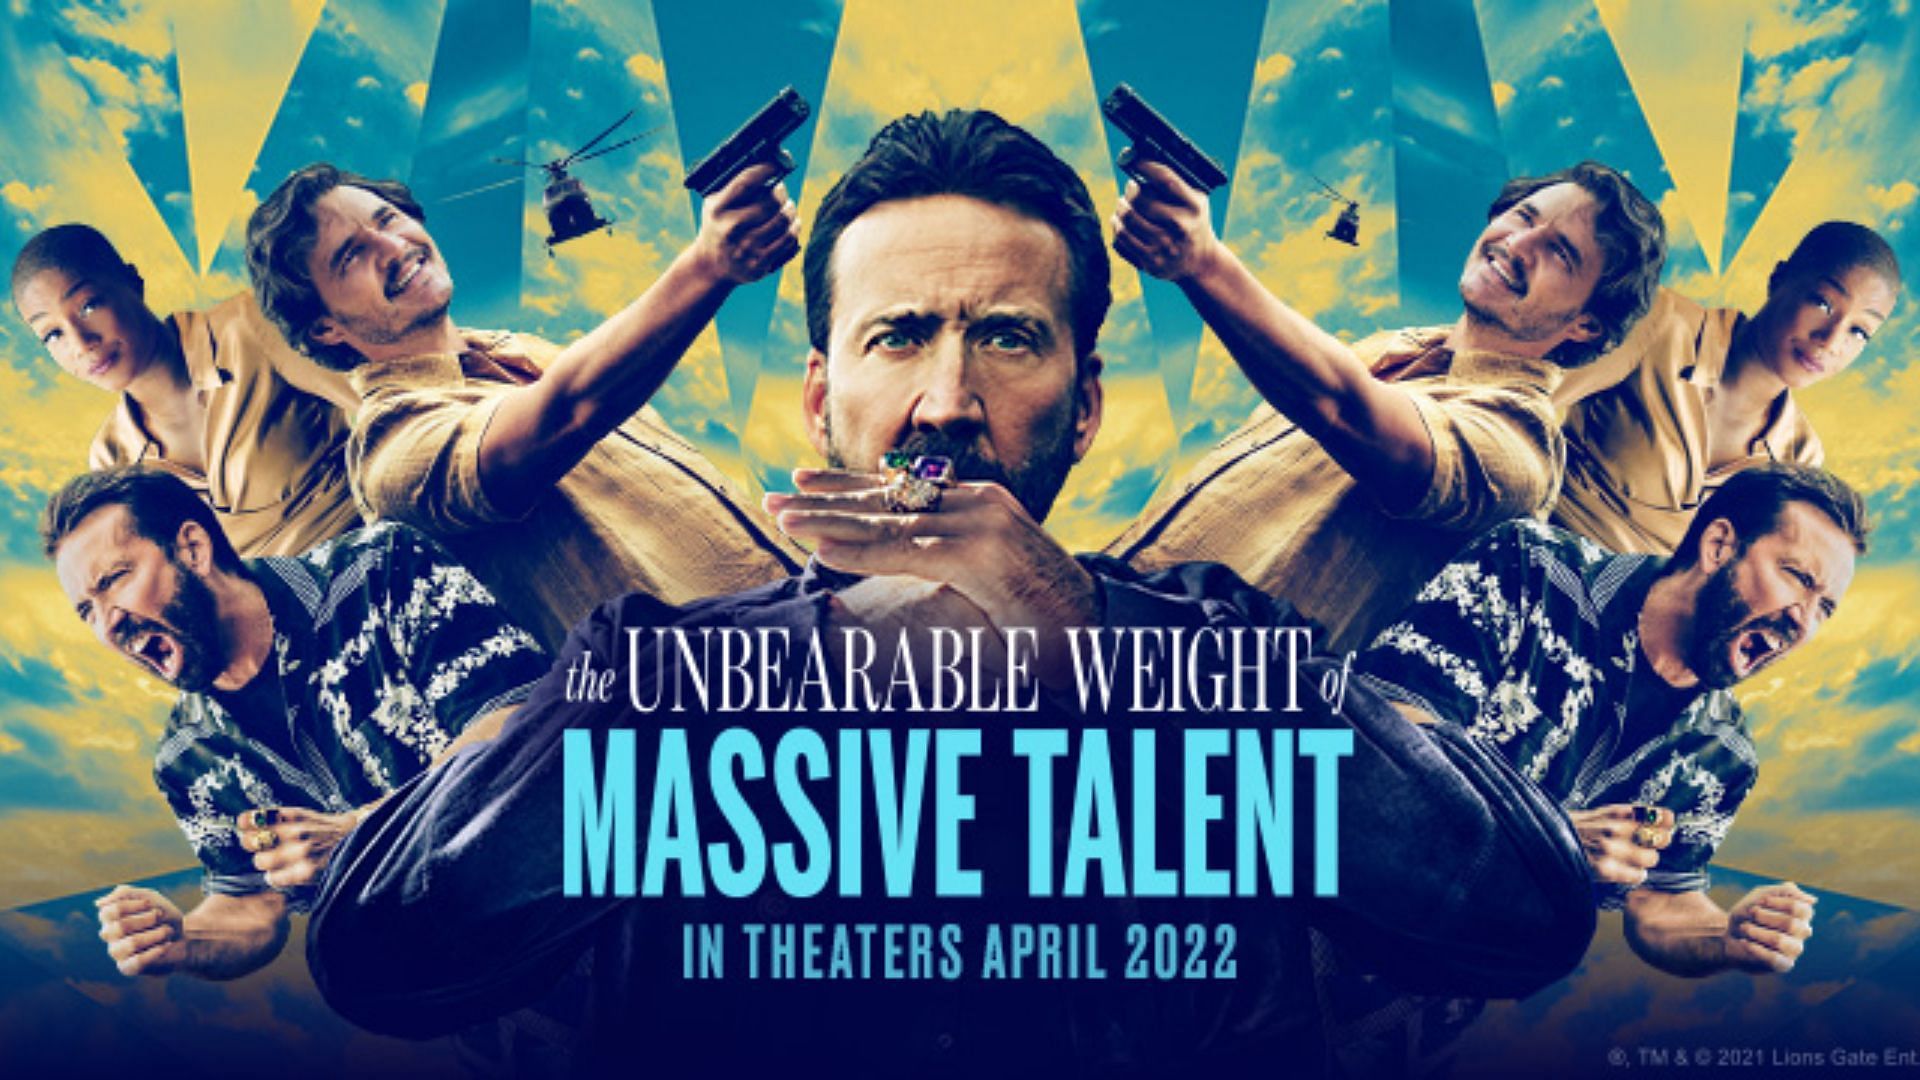 The Unbearable Weight of Massive Talent (Image via Lionsgate)